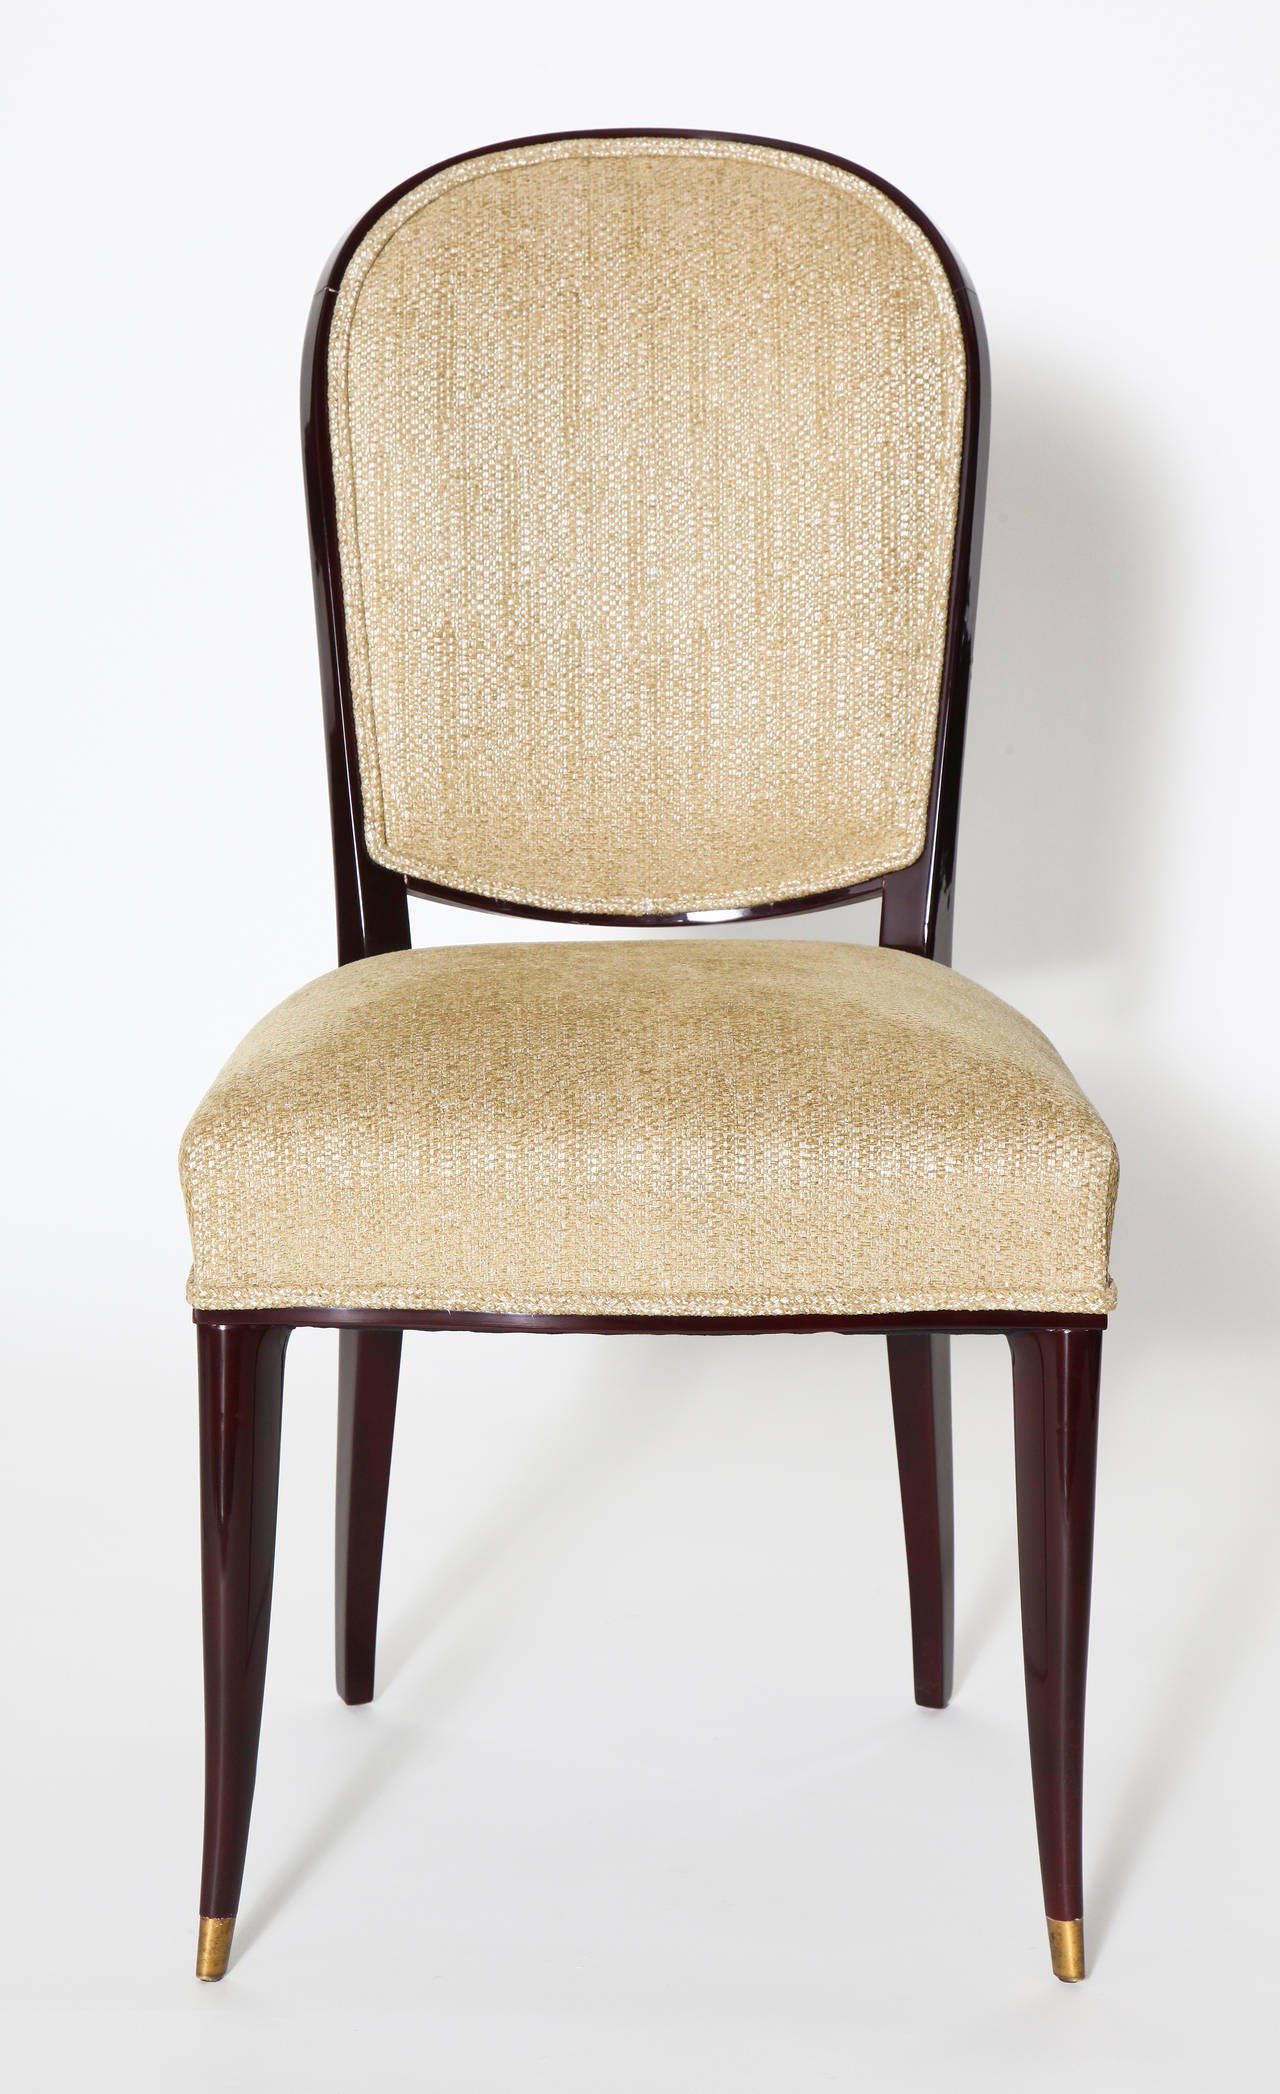 Pair of dining chairs in original Beka lacquer by Sain and Tambute´, with gilt bronze sabots. Each chair is numbered: 33341 through 33348

For an illustration of a similar model, see Siriex, Franc¸oise. The House of Leleu. New York: Hudson Hills